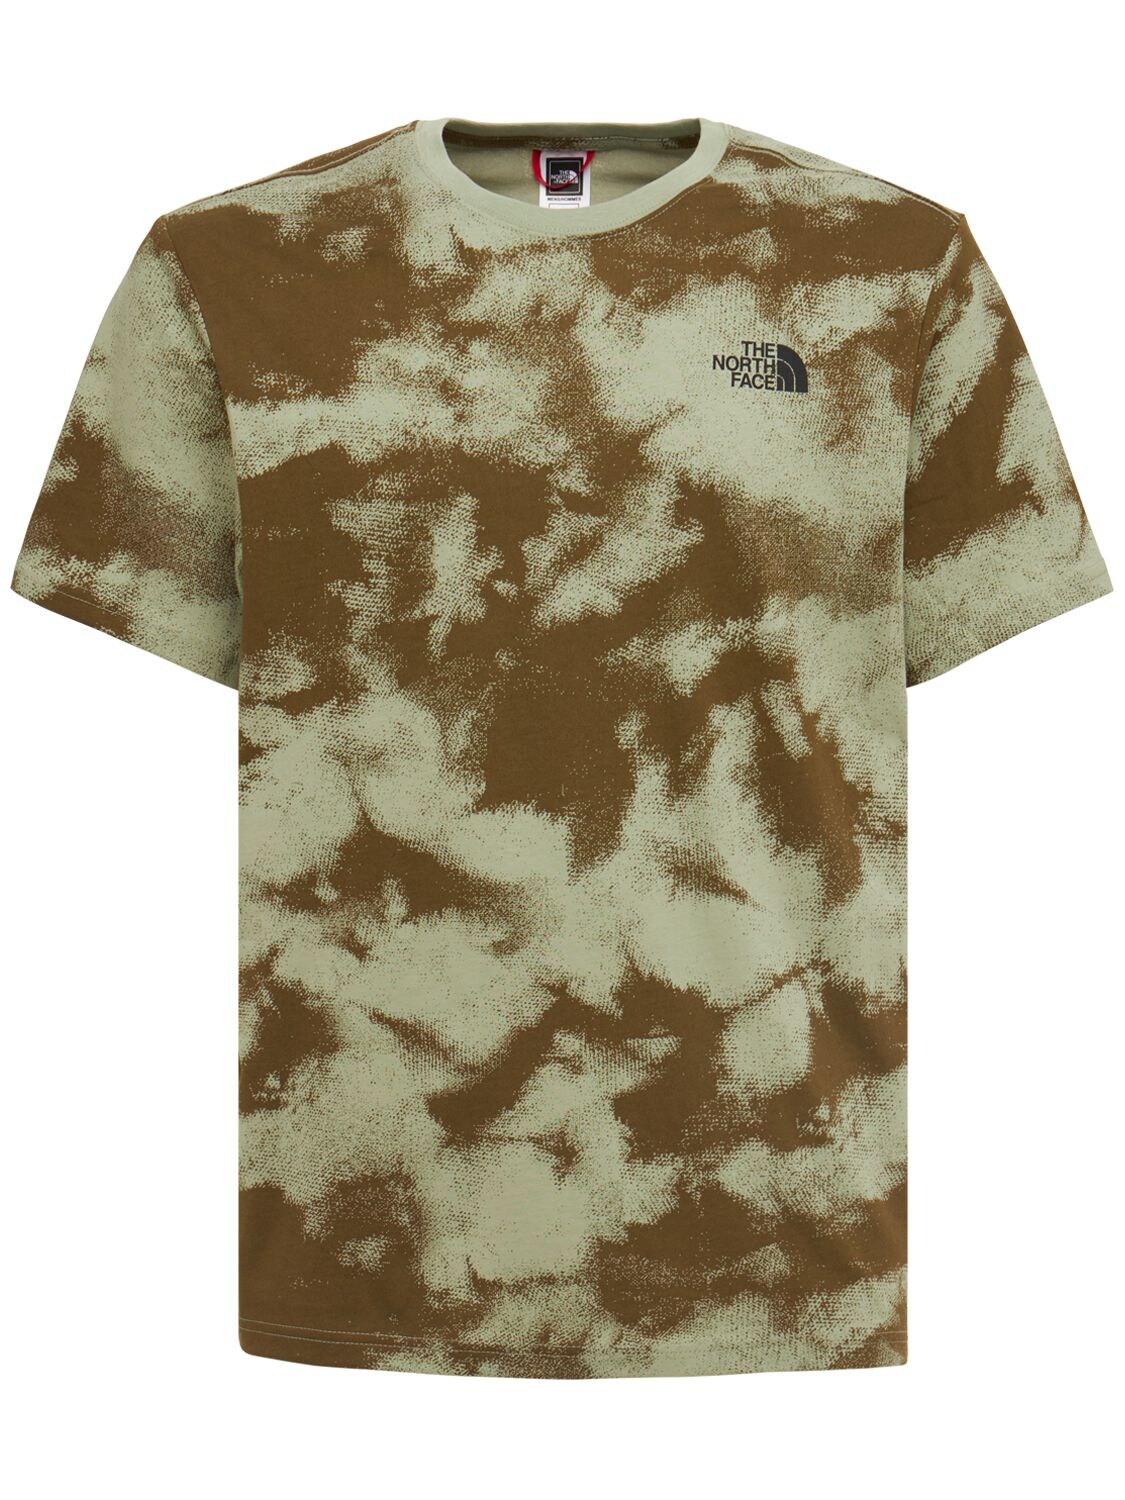 The North Face Red Box Logo Cotton T-shirt In Military Camo